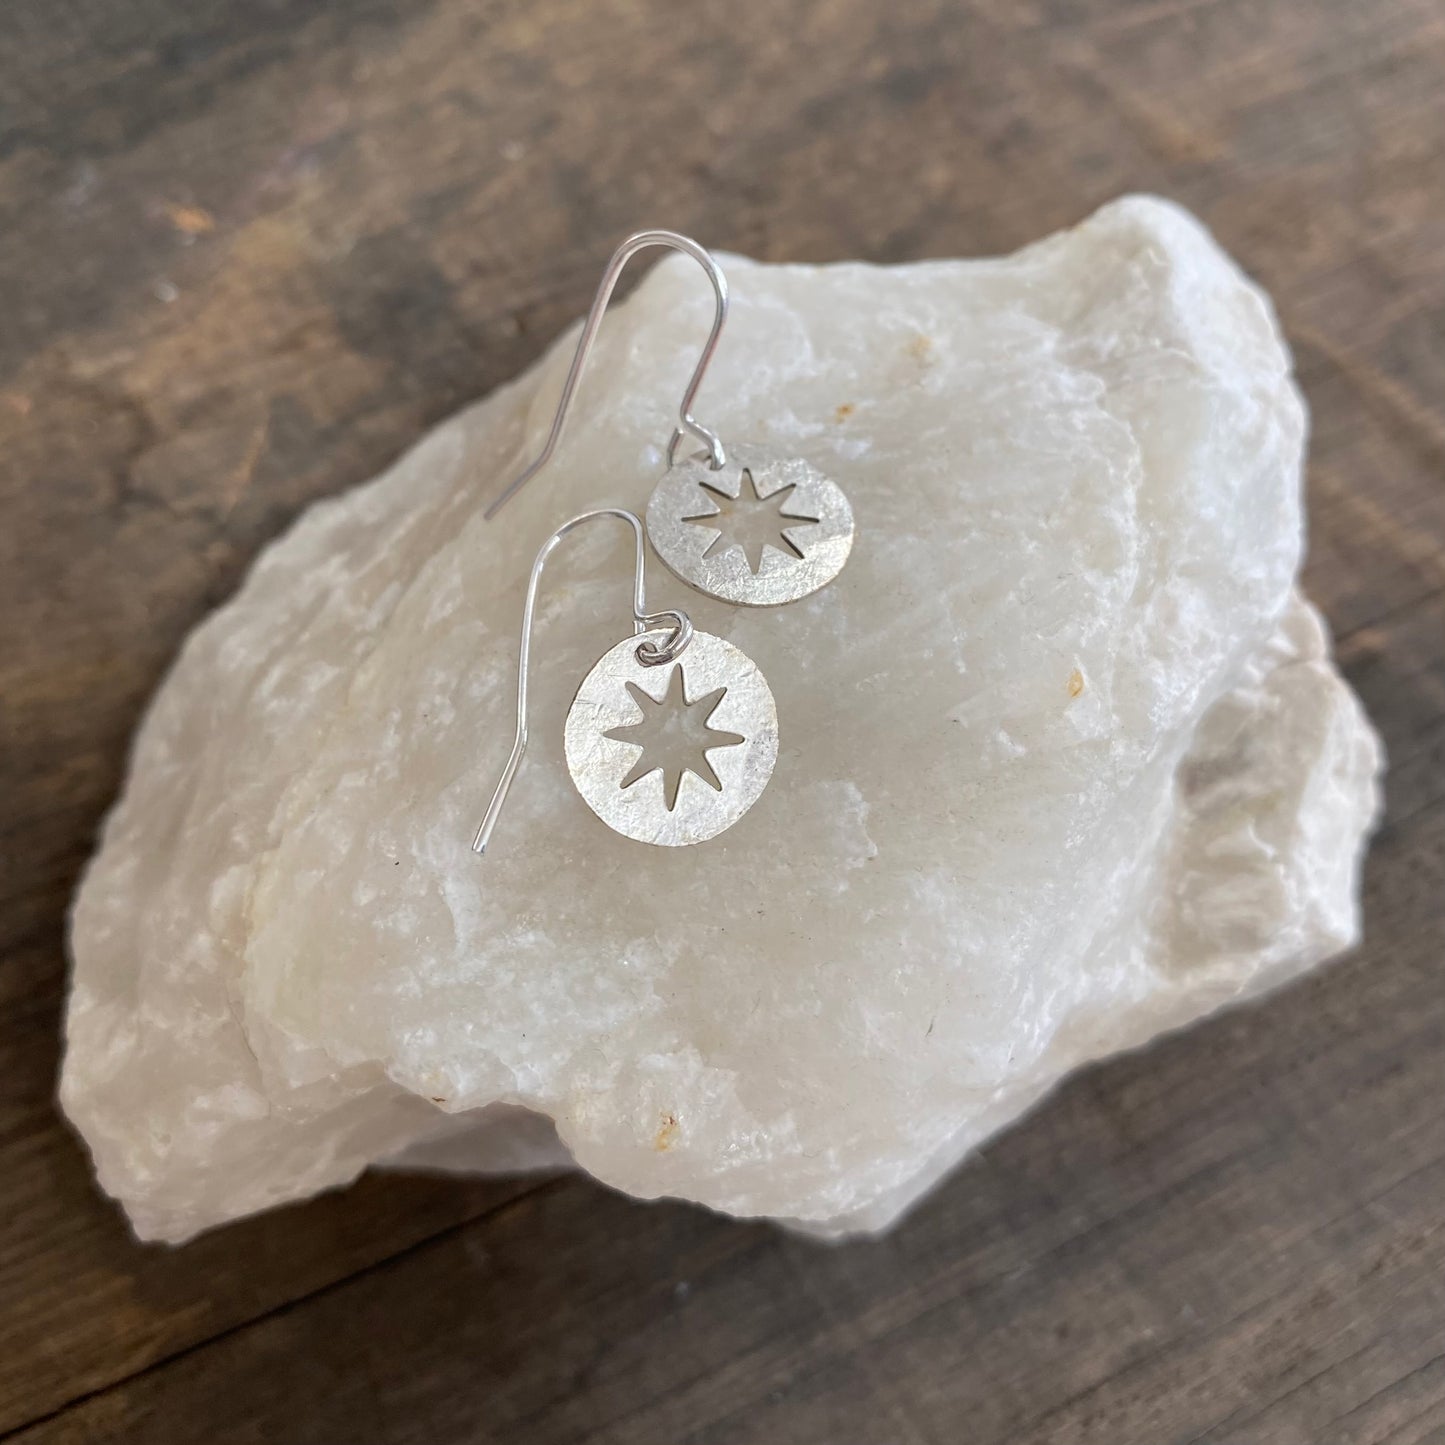 Hammered Silver Tone Star Cut Out Earrings